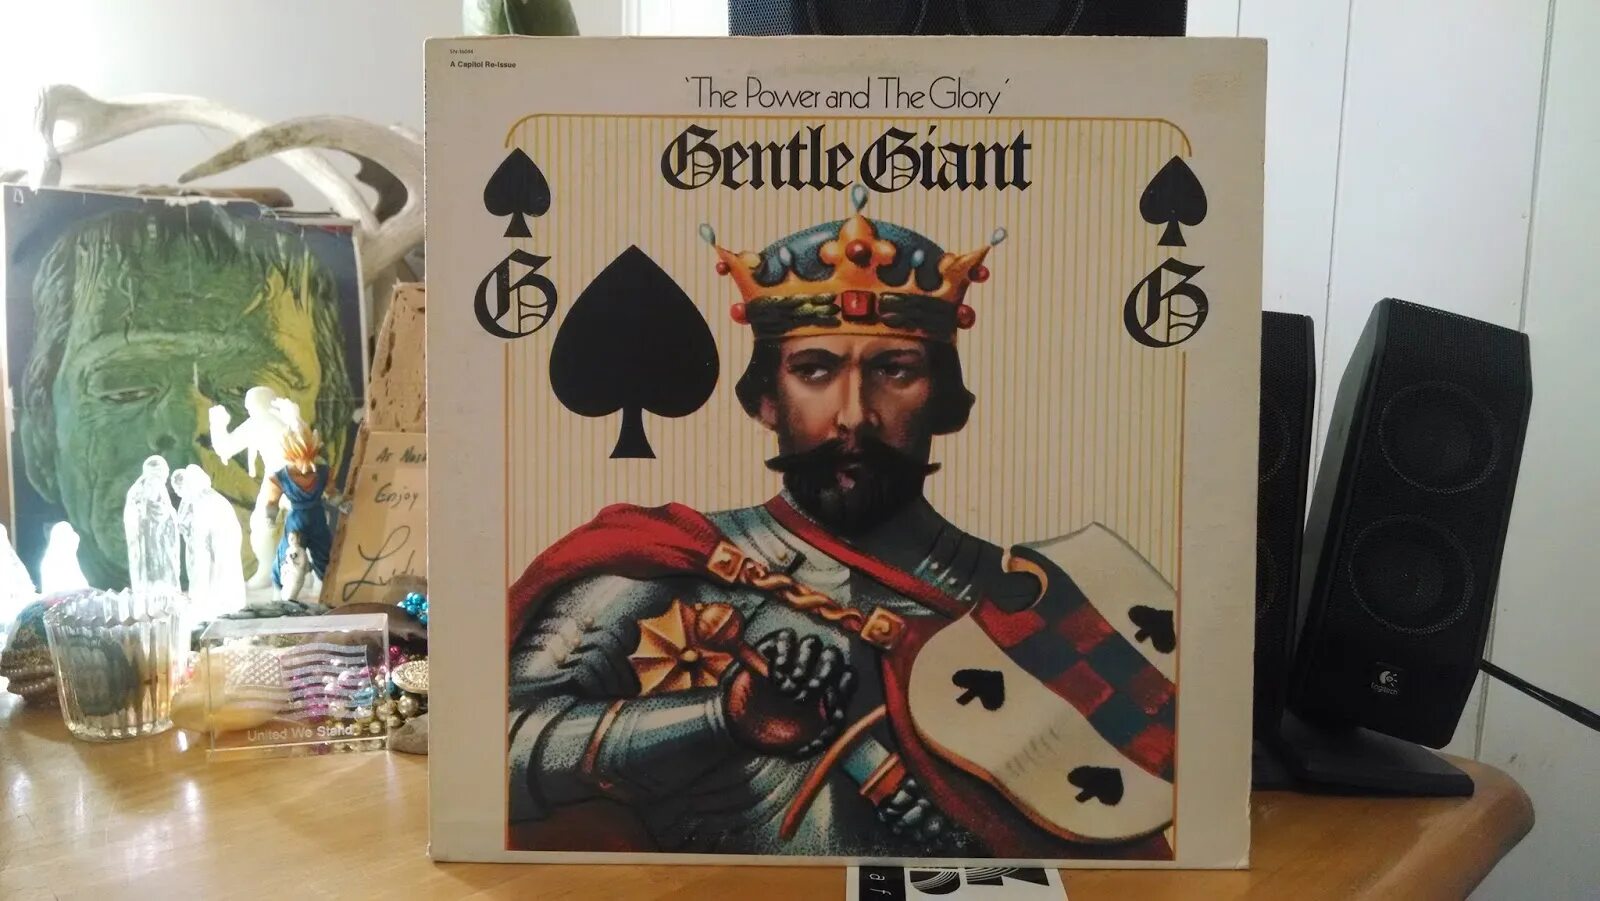 Gentle giant Power and the Glory. 1974 - The Power and the Glory. Gentle giant gentle giant 1974 Cover. Gentle giant the Power and the Glory Cover. Глори перевод